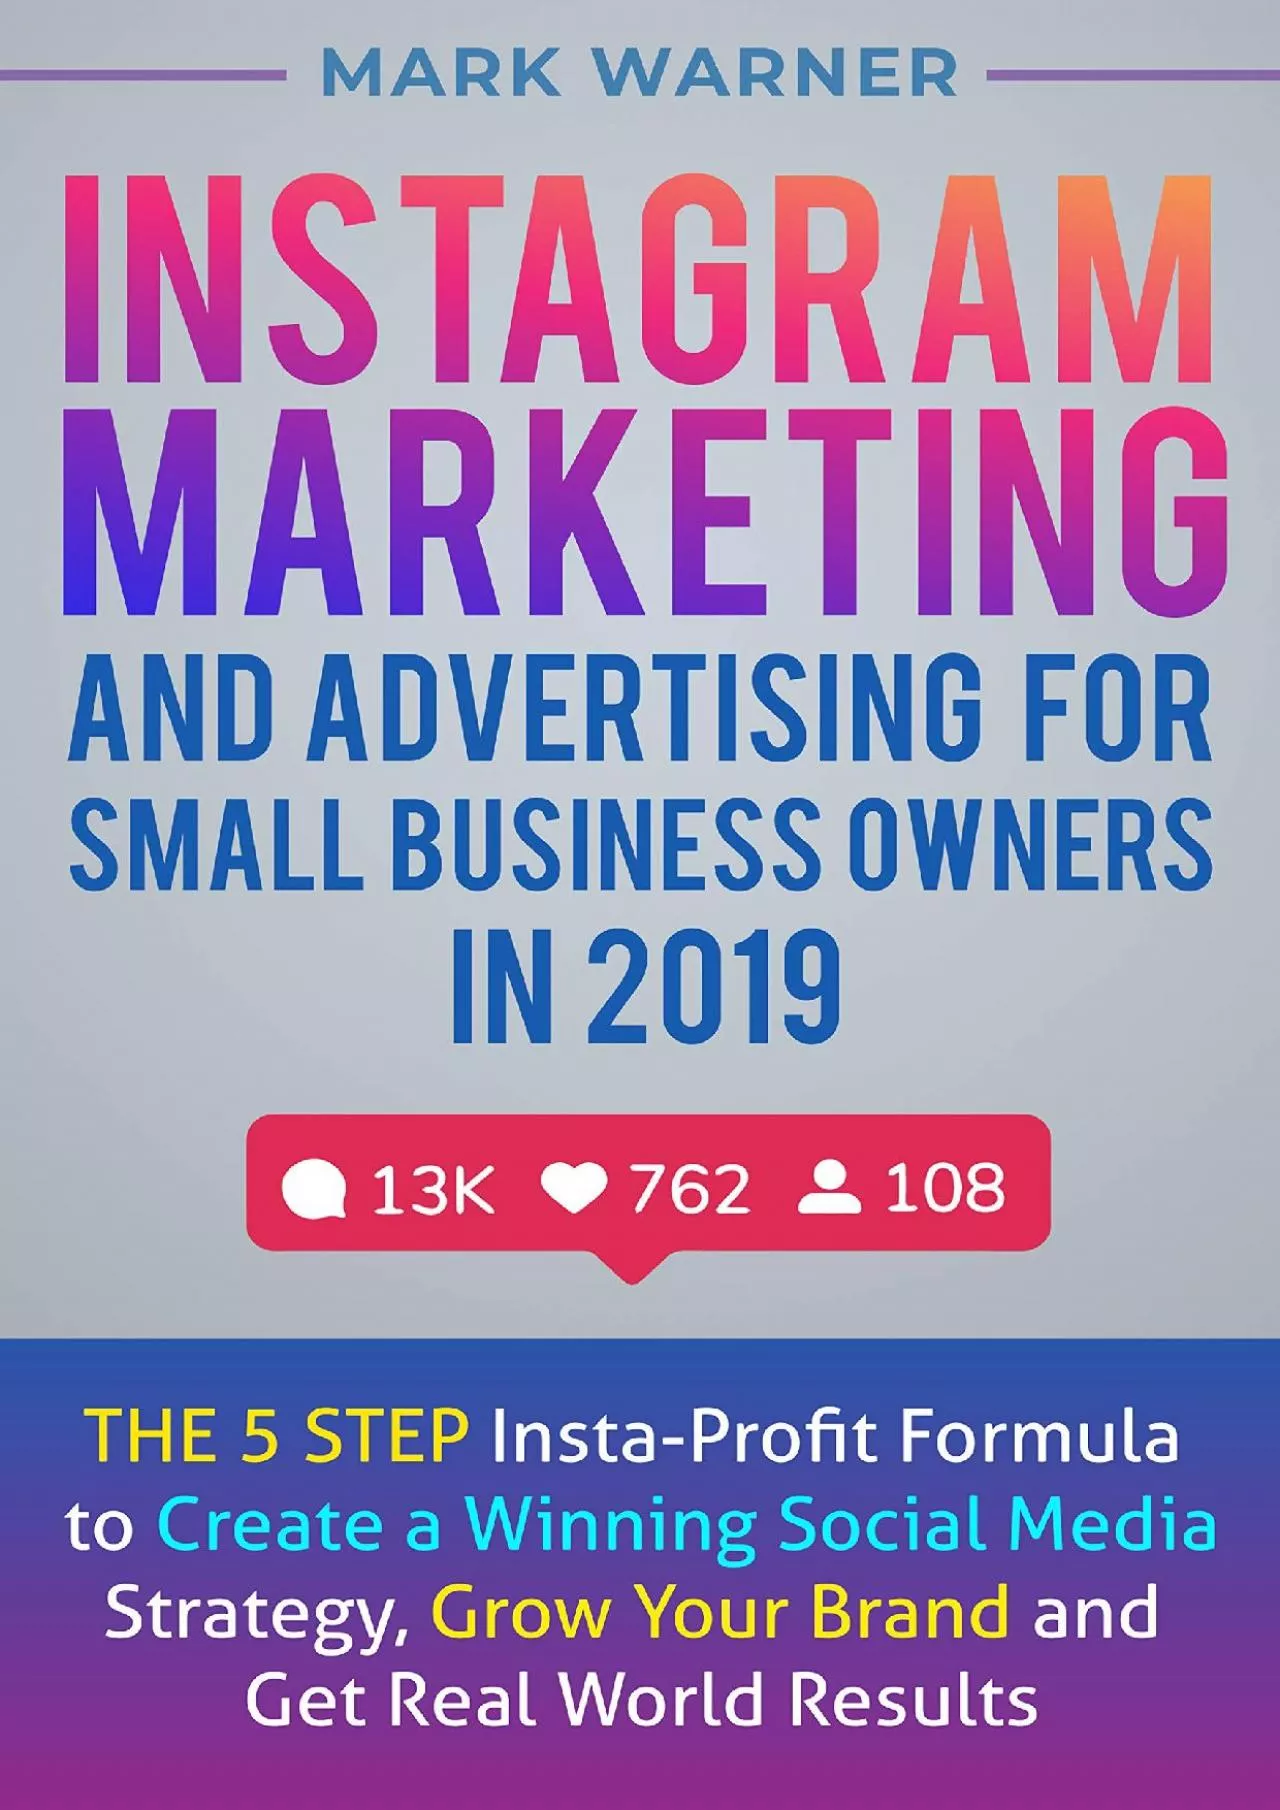 Instagram Marketing and Advertising for Small Business Owners in 2019: The 5 Step Insta-Profit